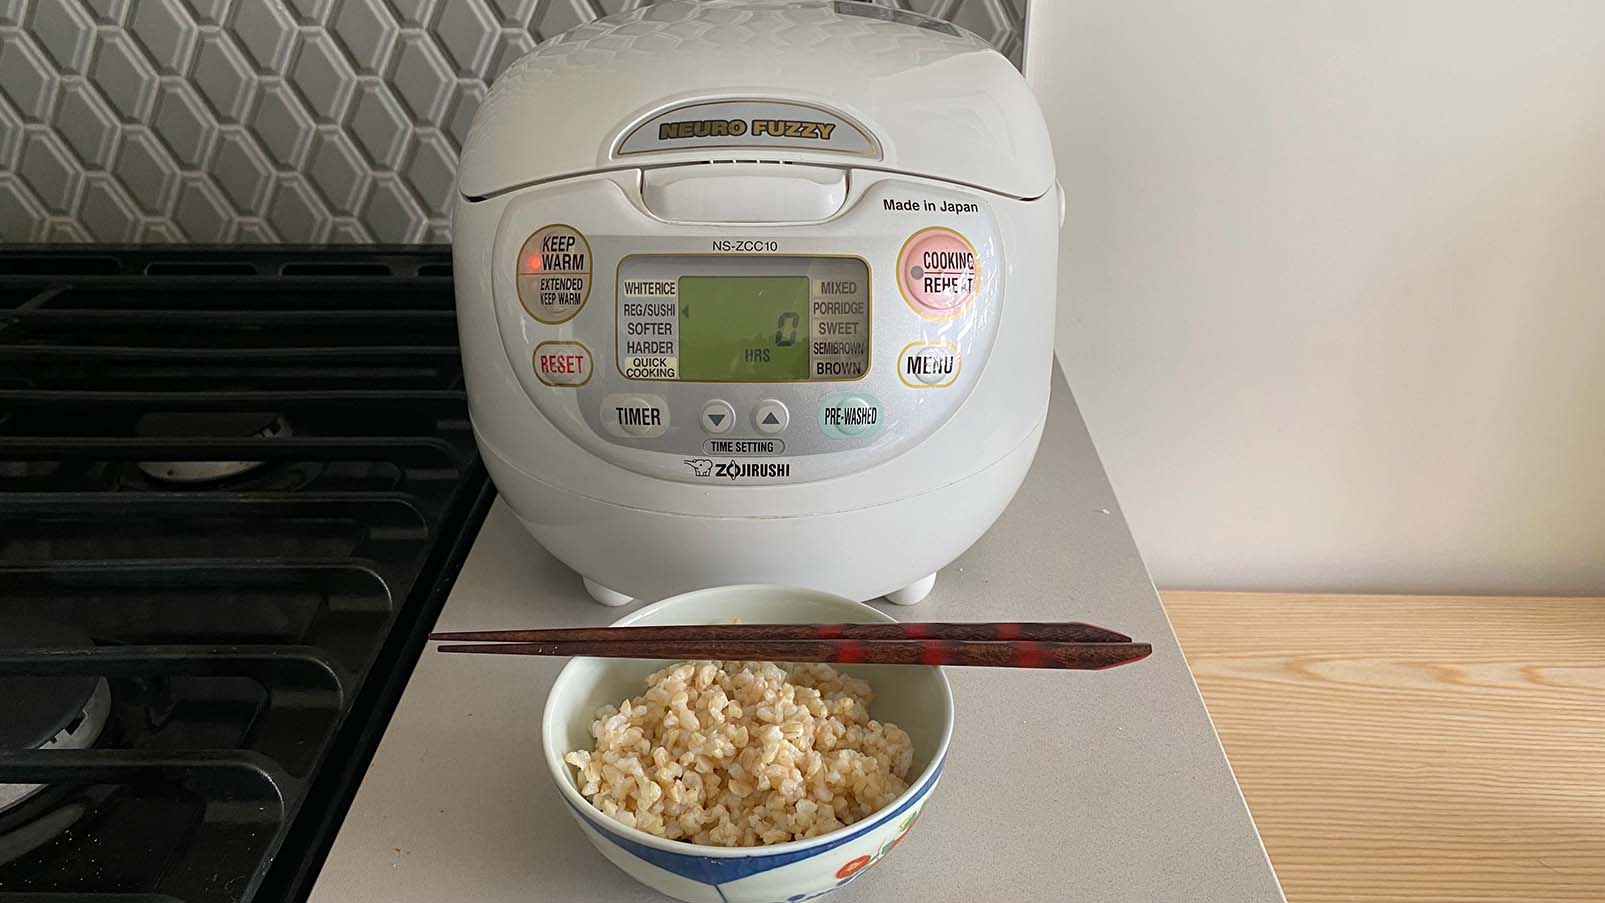 Instructions for Using a Neuro Fuzzy Rice Cooker